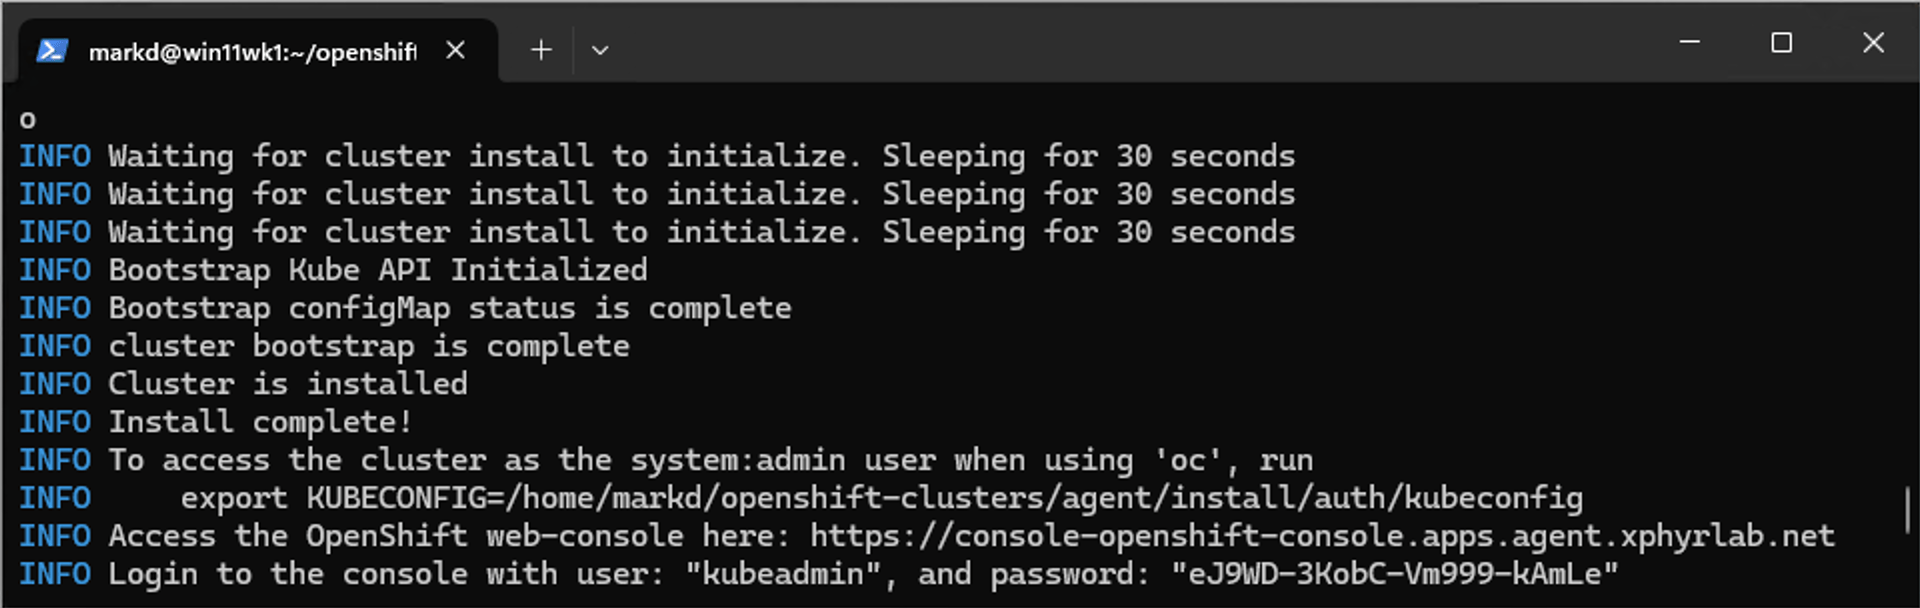 image from Installing OpenShift using Windows Subsystem for Linux